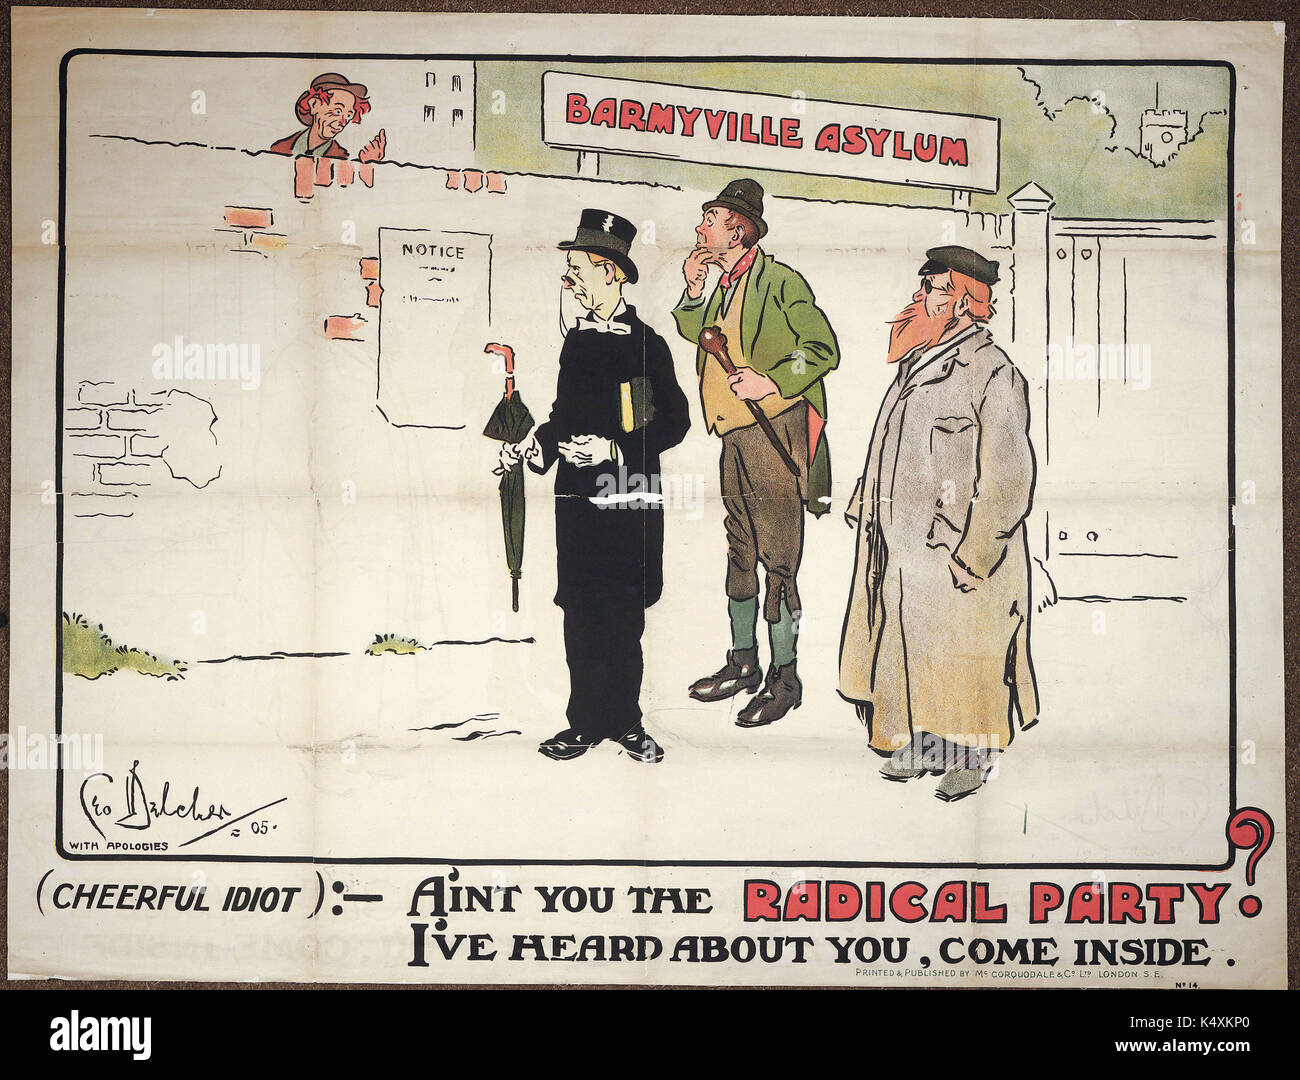 Ain't You the Radical Party  (Barmyville Asylum).  - British Political Posters, c1905-c1910 Stock Photo